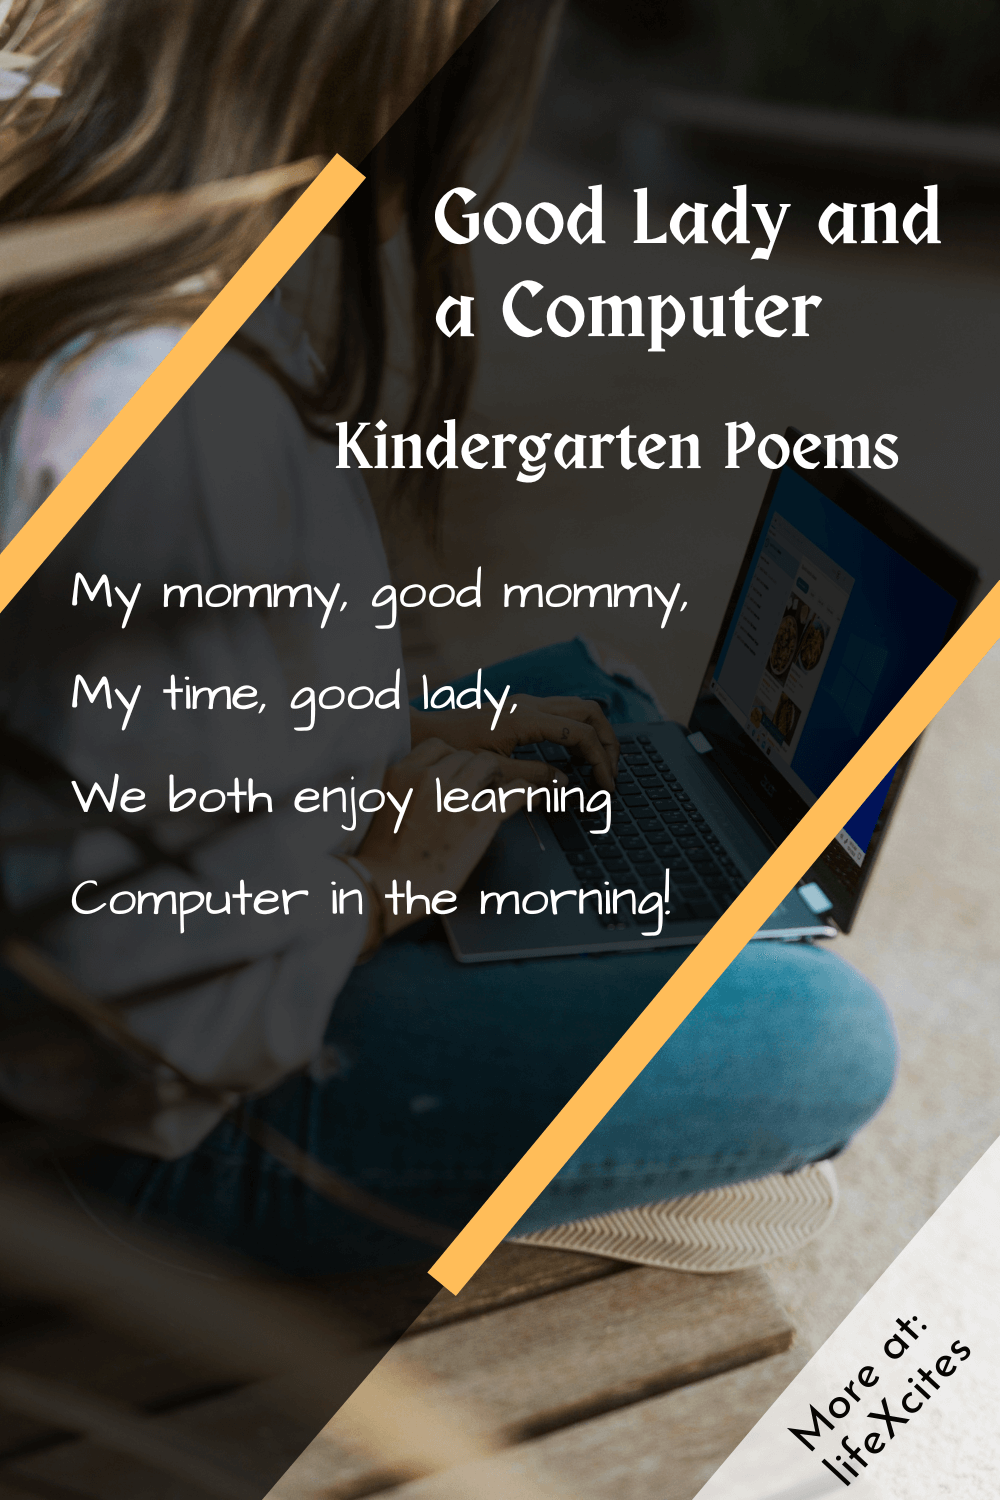 good lady and a computer kindergarten poem